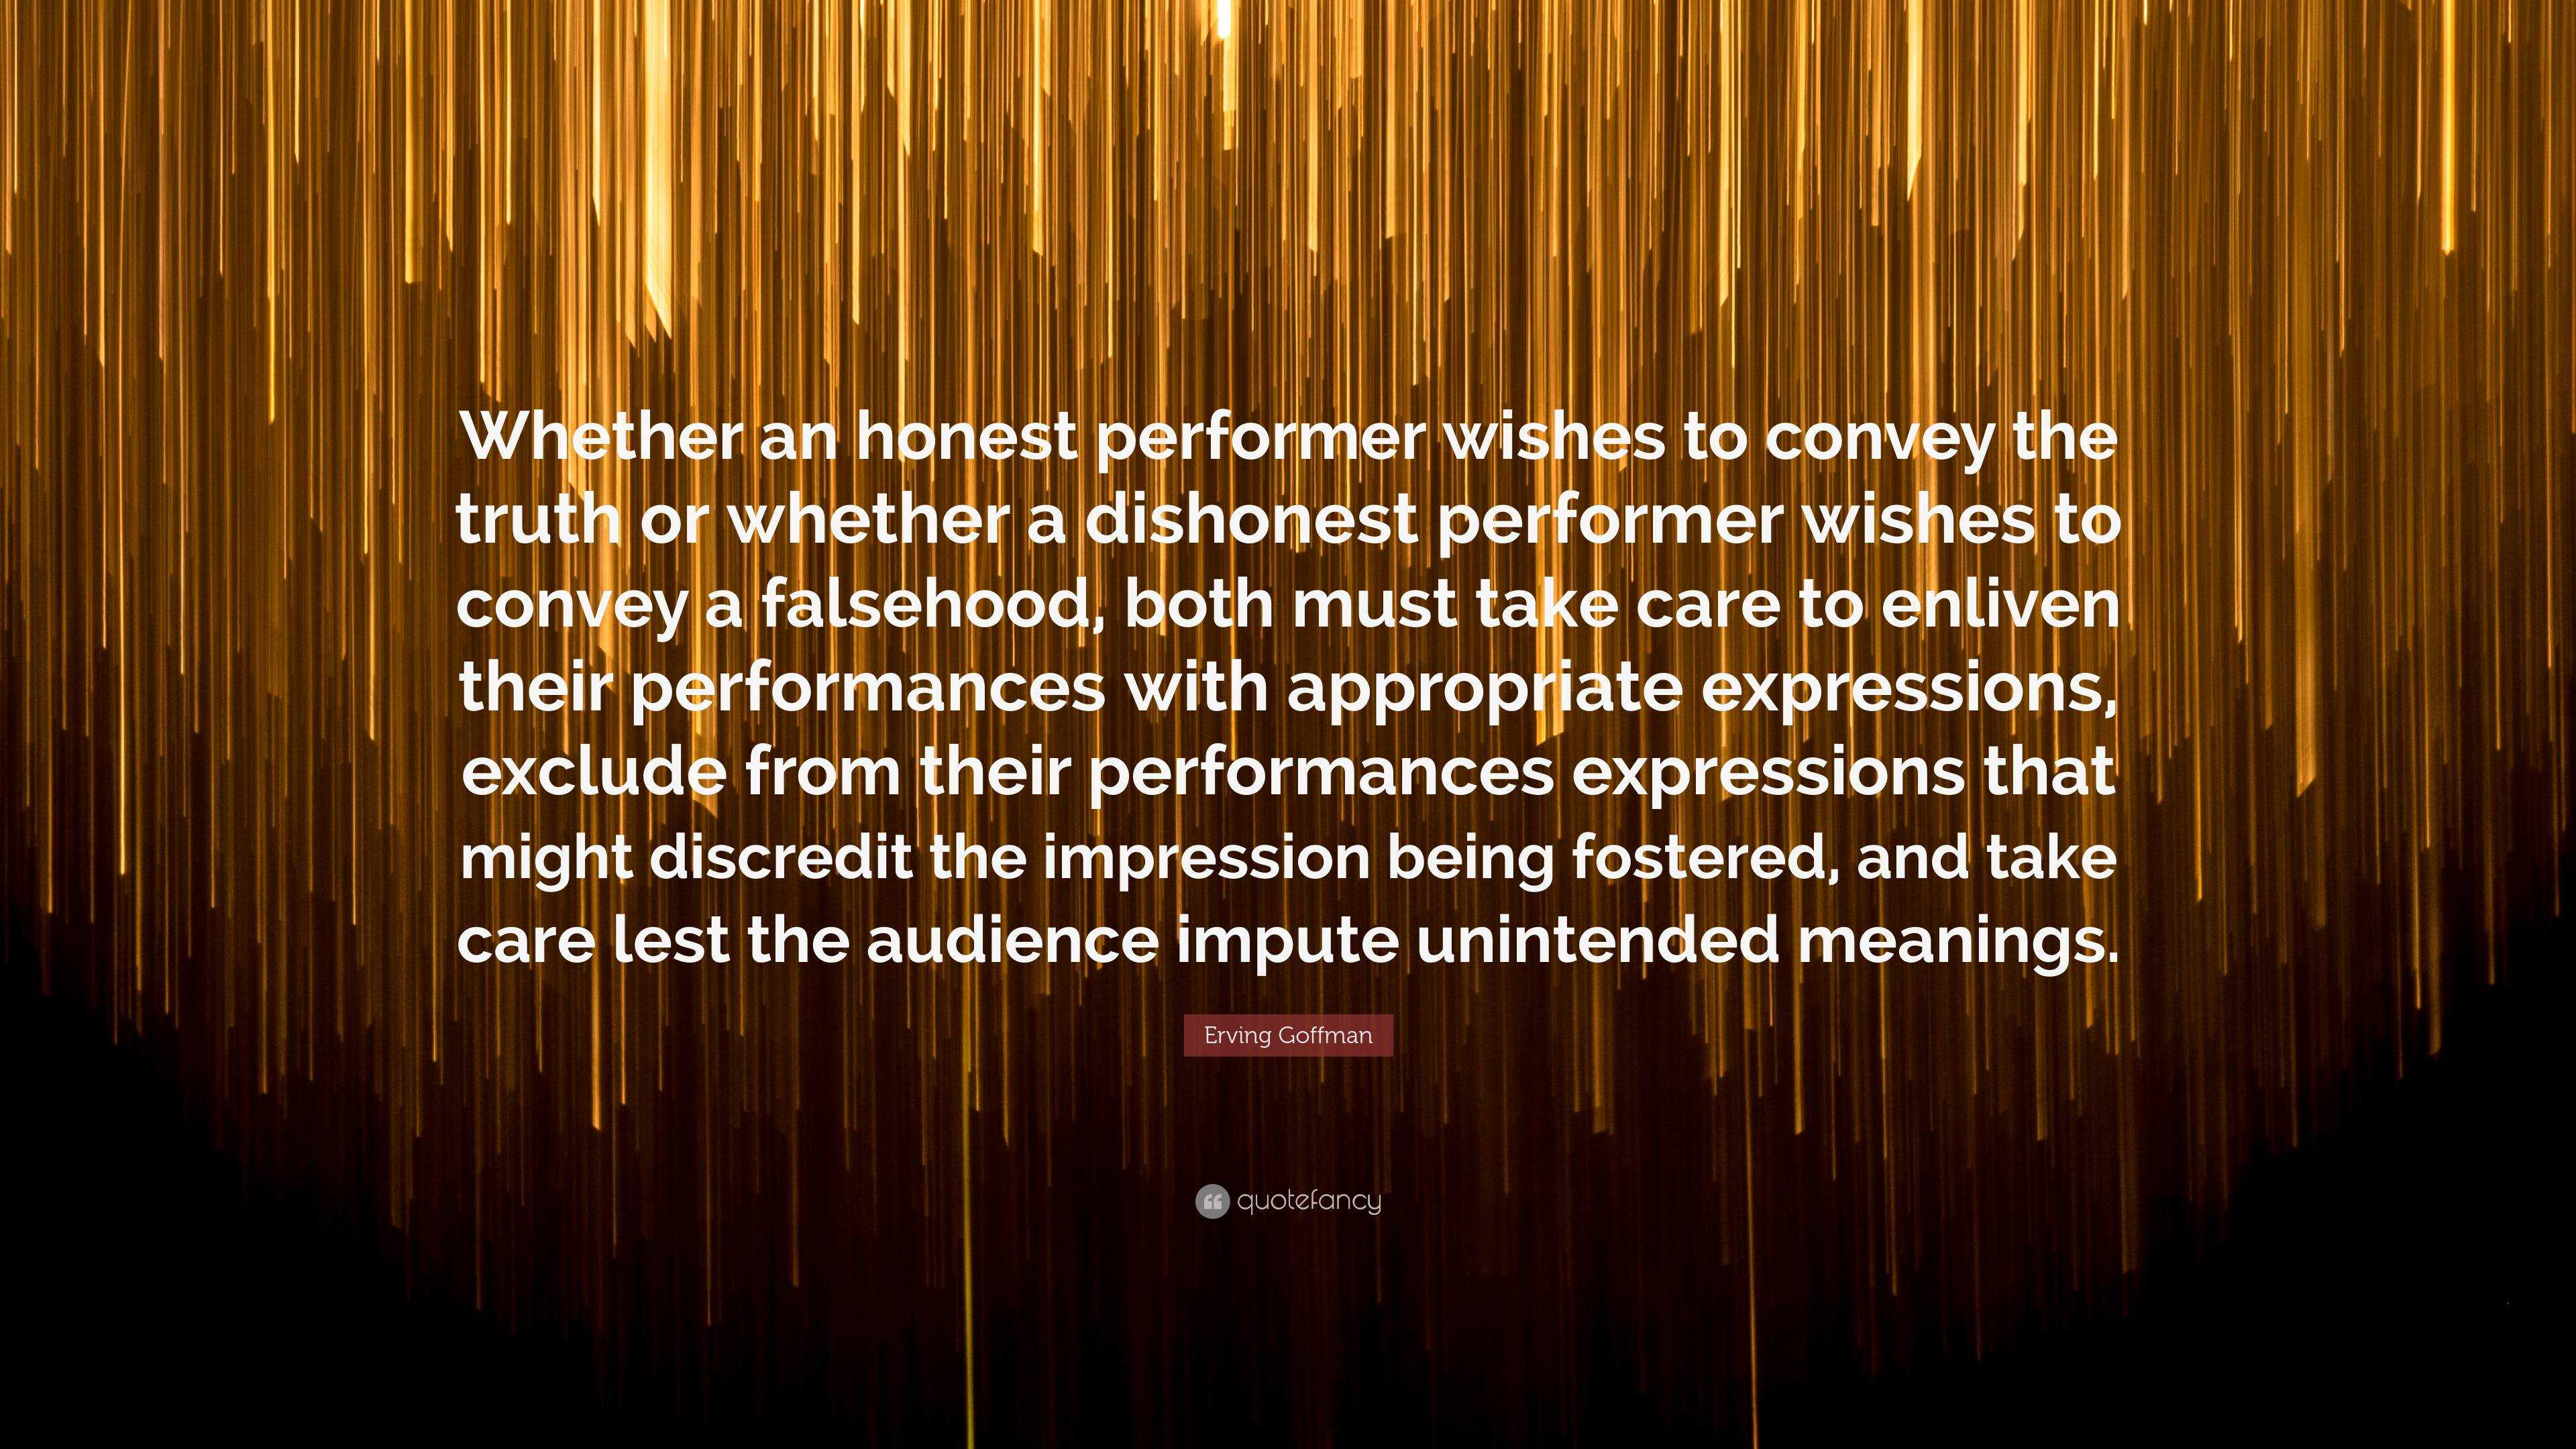 Erving Goffman Quote: “Whether an honest performer wishes to convey the ...